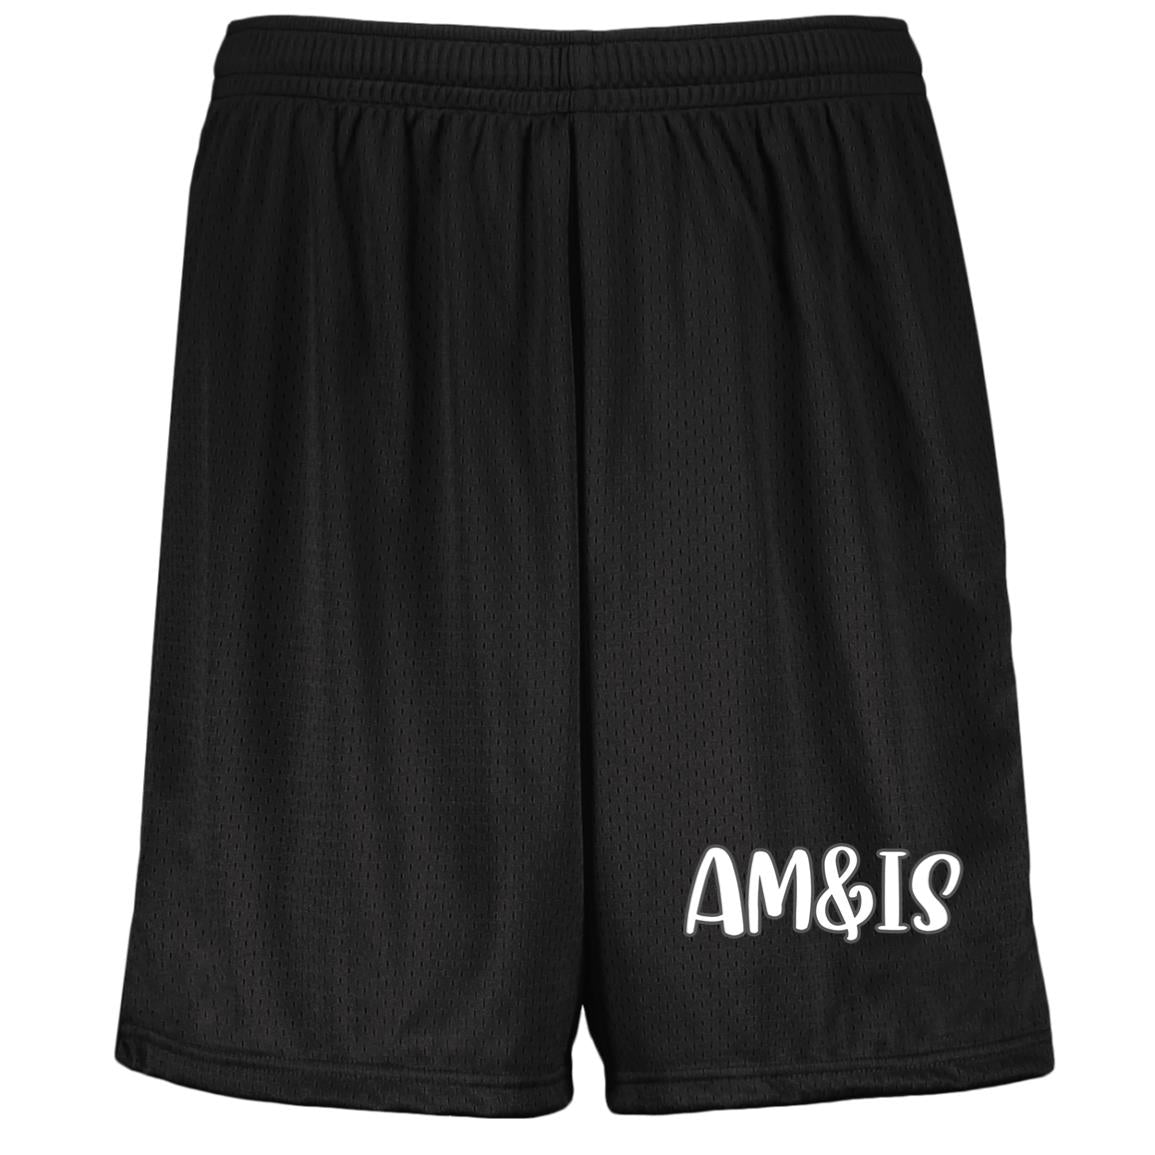 BLACK - AM&IS Activewear Youth Moisture-Wicking Mesh Shorts - kids shorts at TFC&H Co.